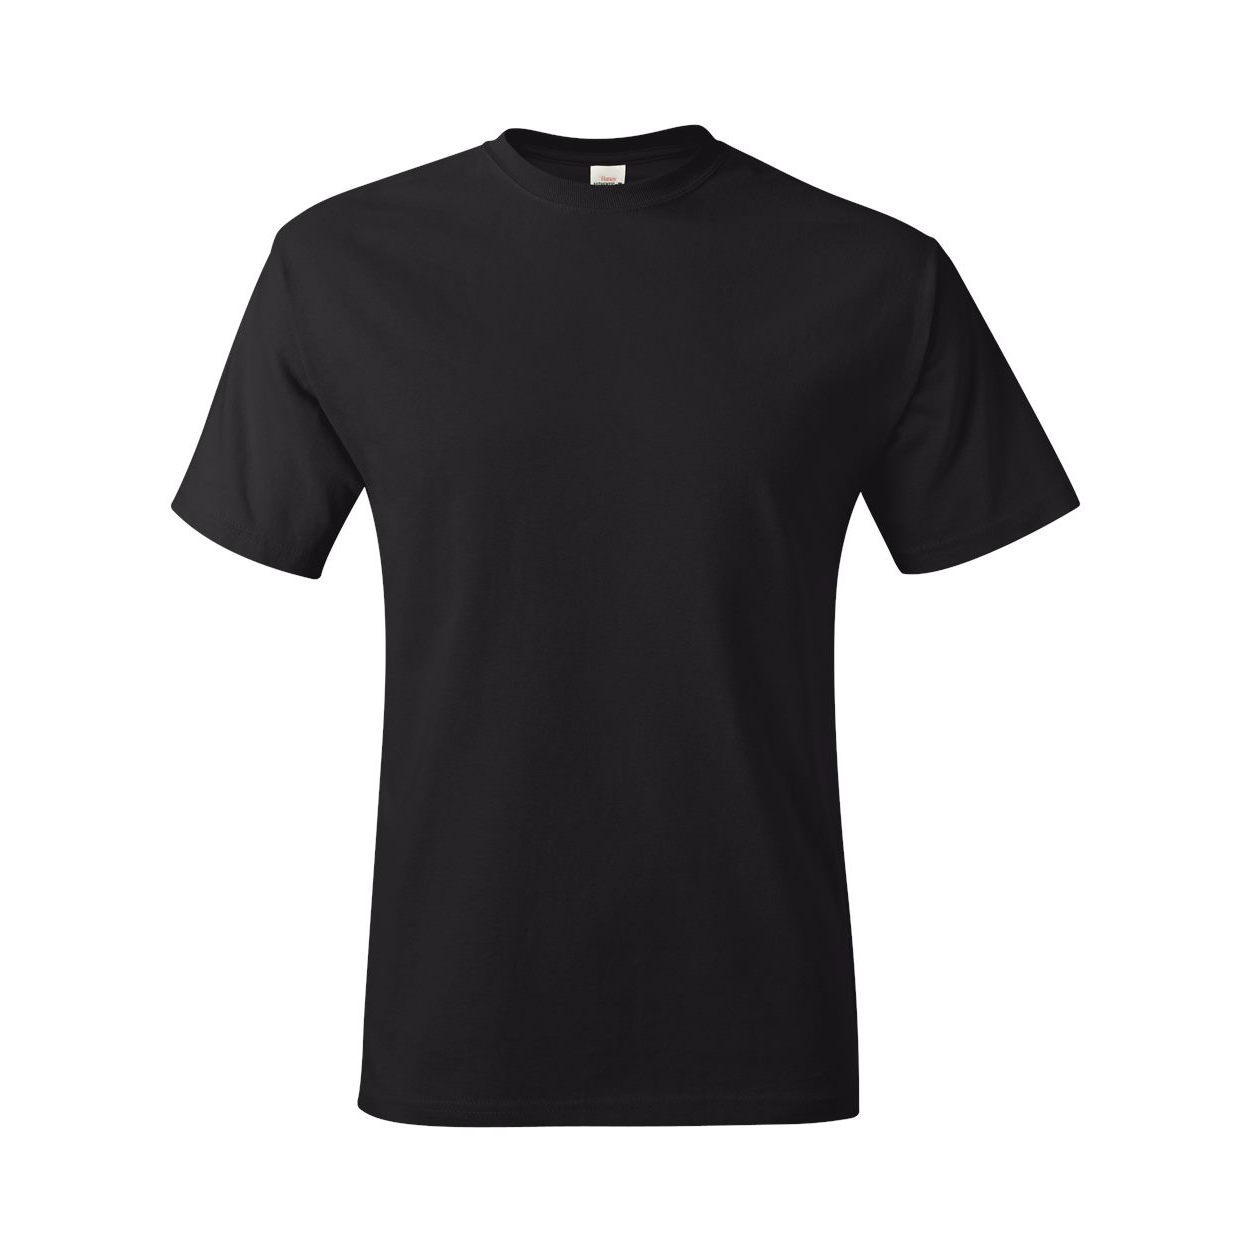 SHORT SLEEVE T-SHIRT – Best Value - North American Safety